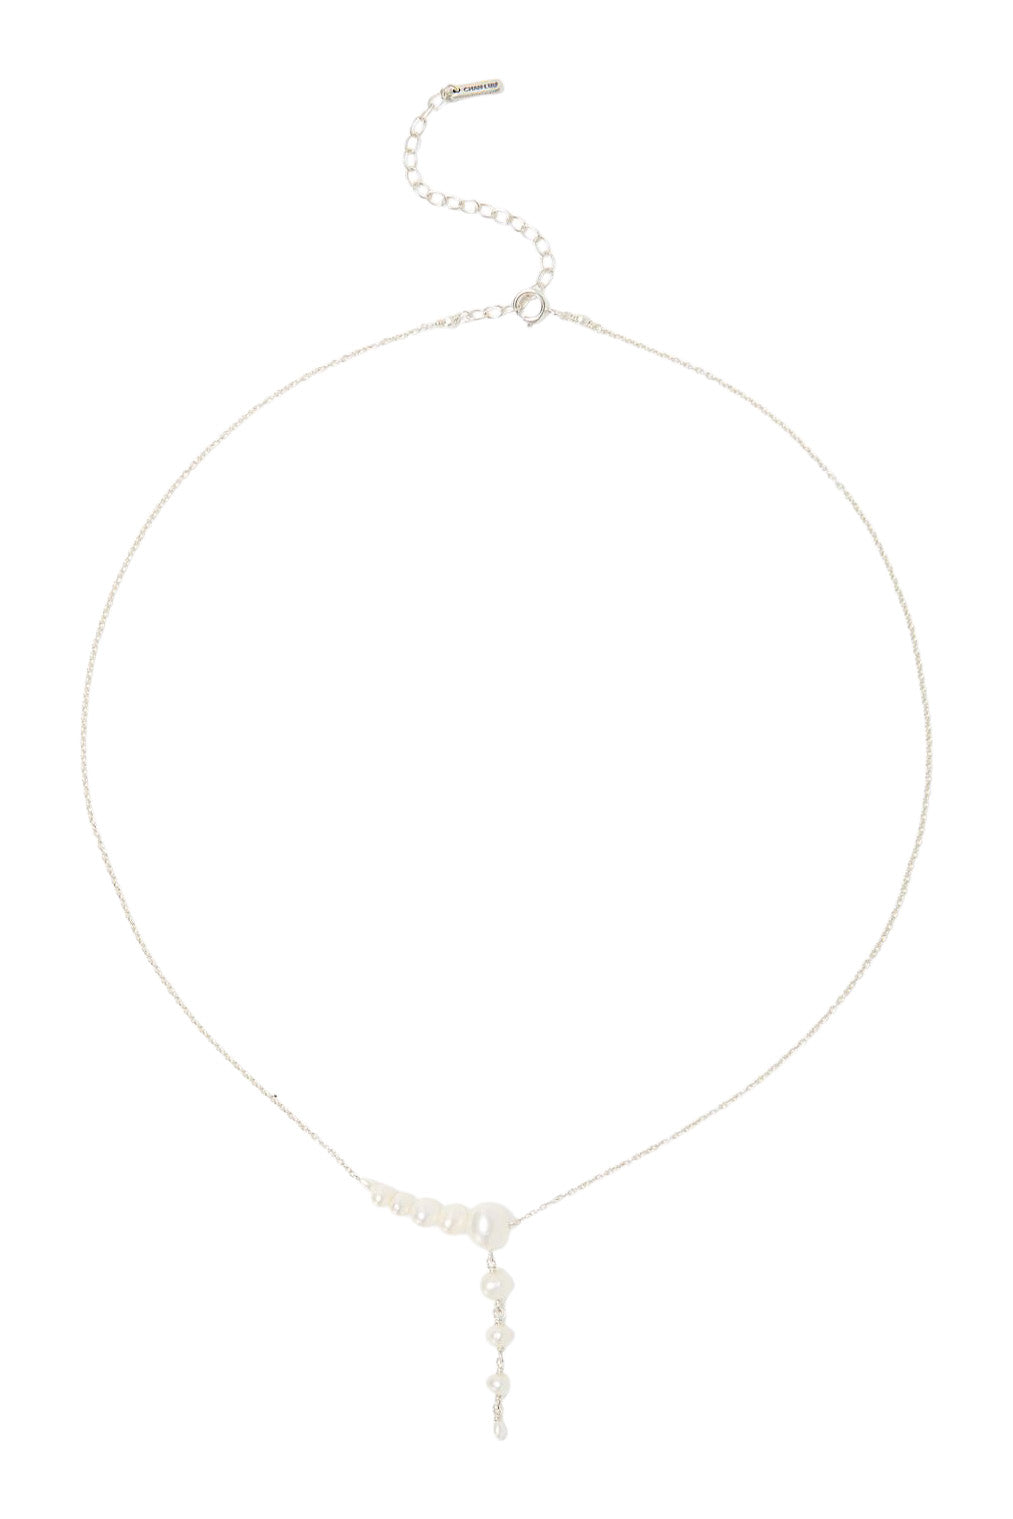 Chan Luu Graduated White Pearl Necklace